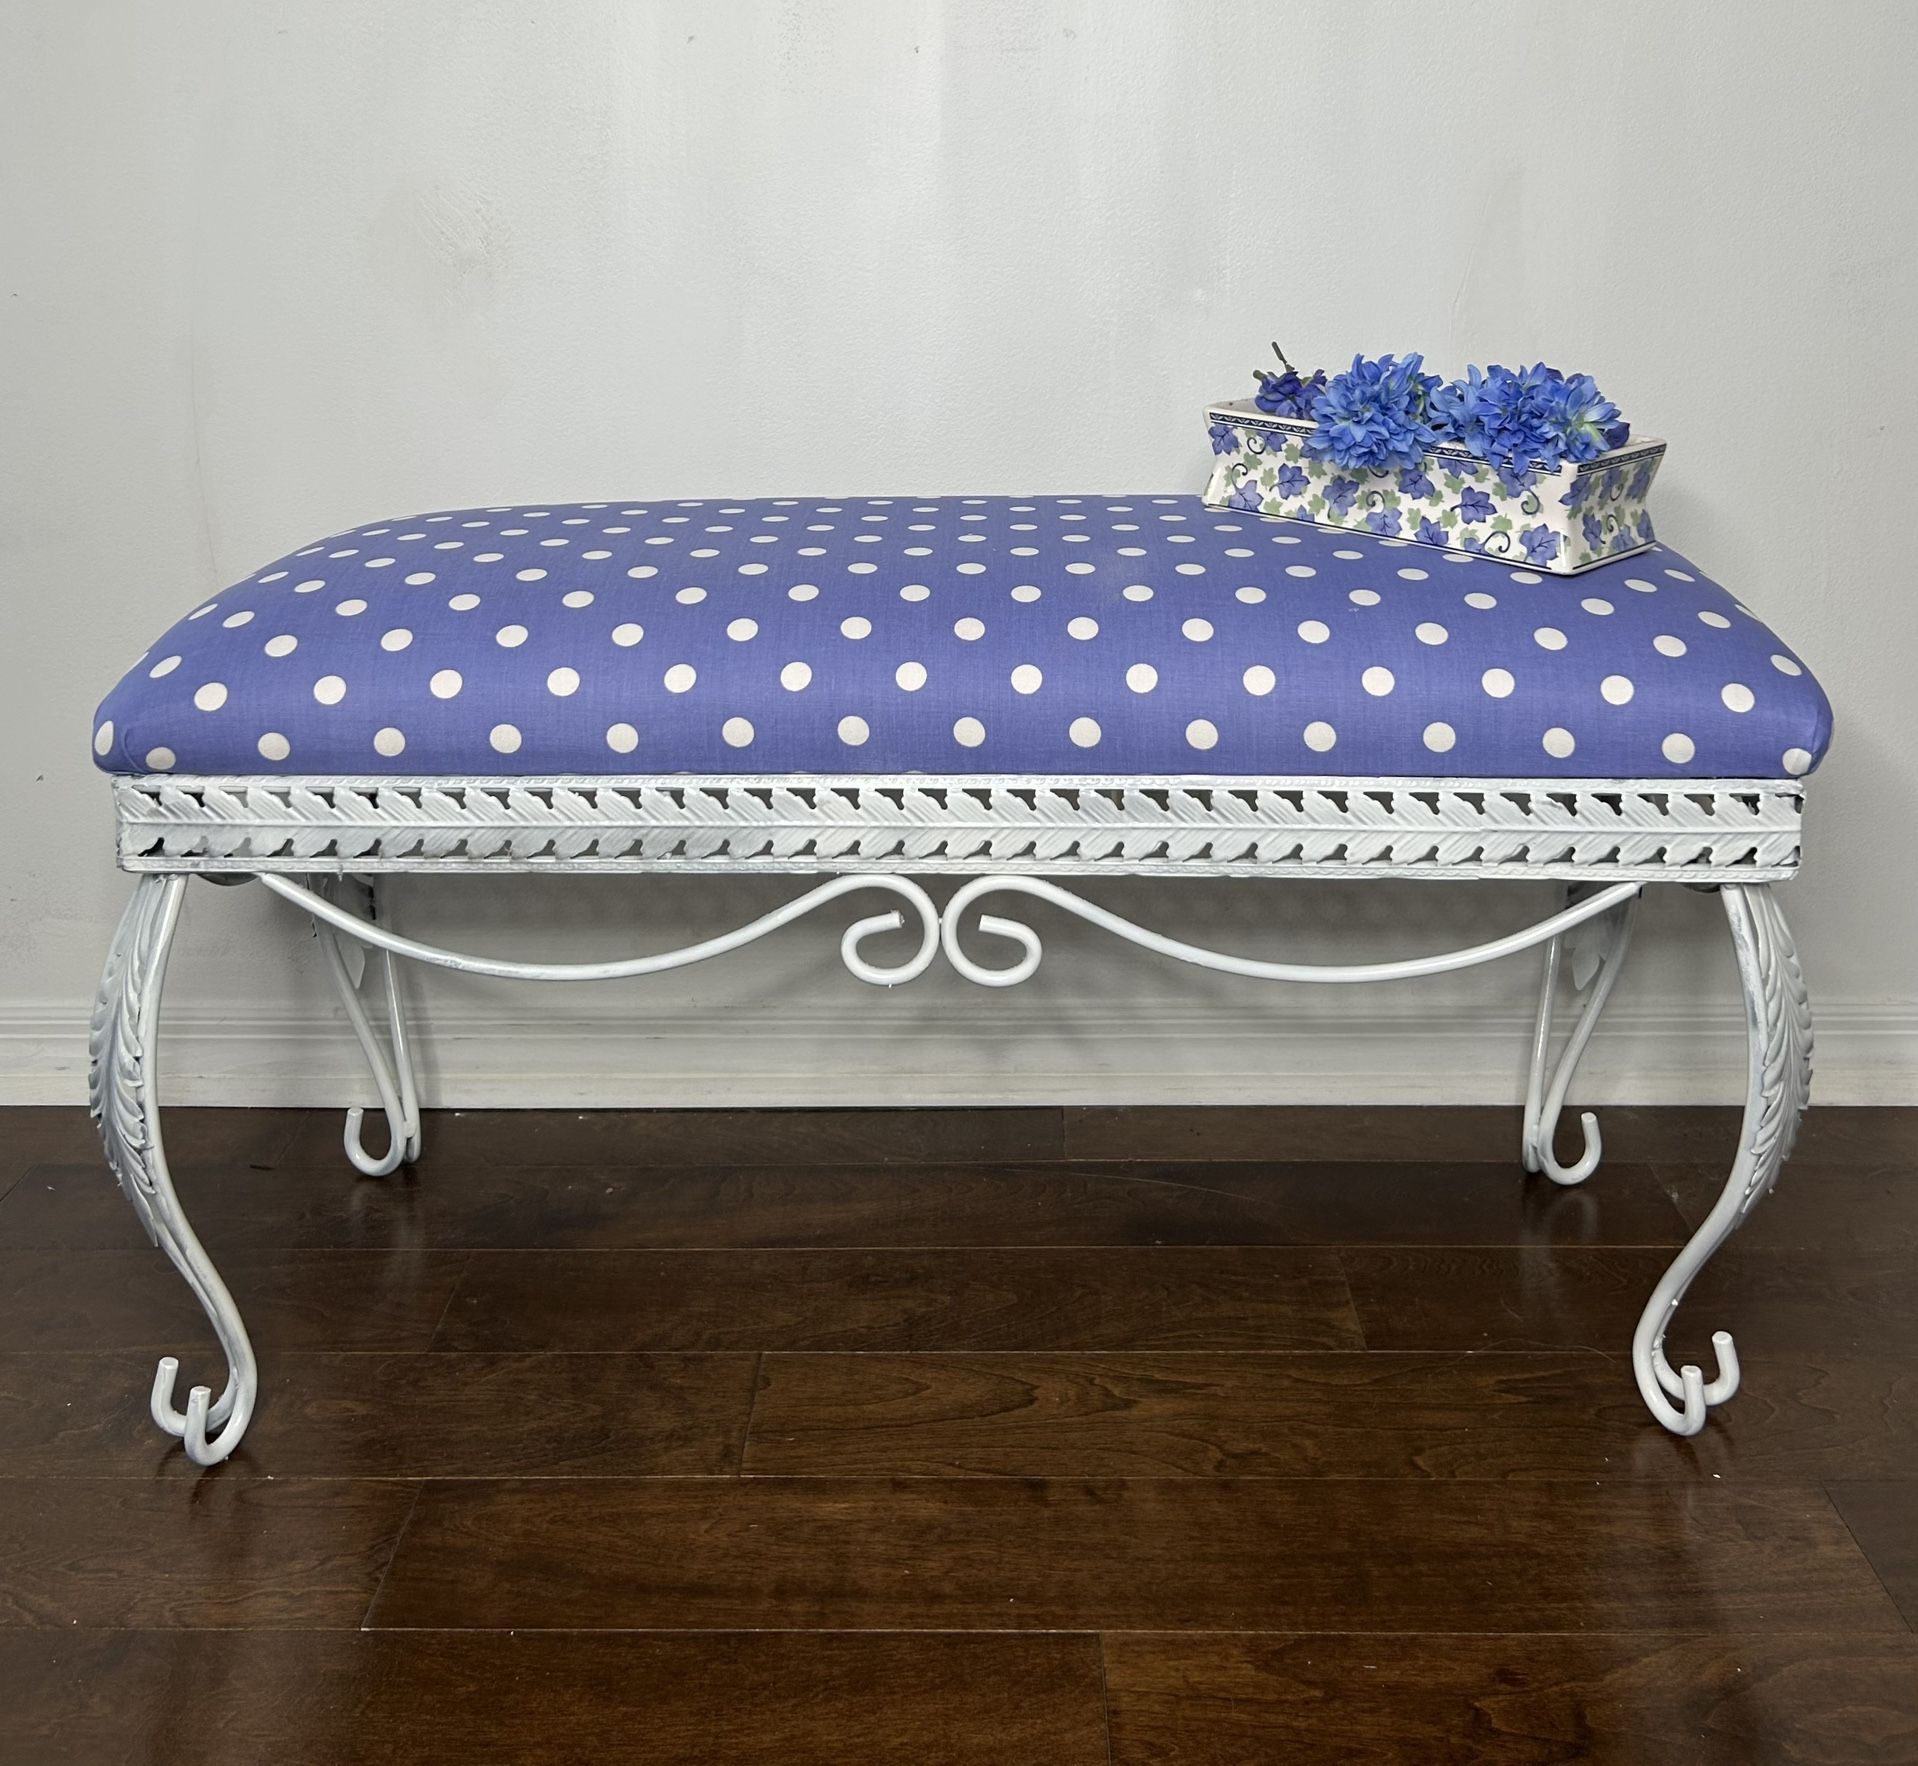 Stunning Periwinkle And White Pokes Dotted Wrought Iron Bench… New Fabric.., Freshly Painted. 